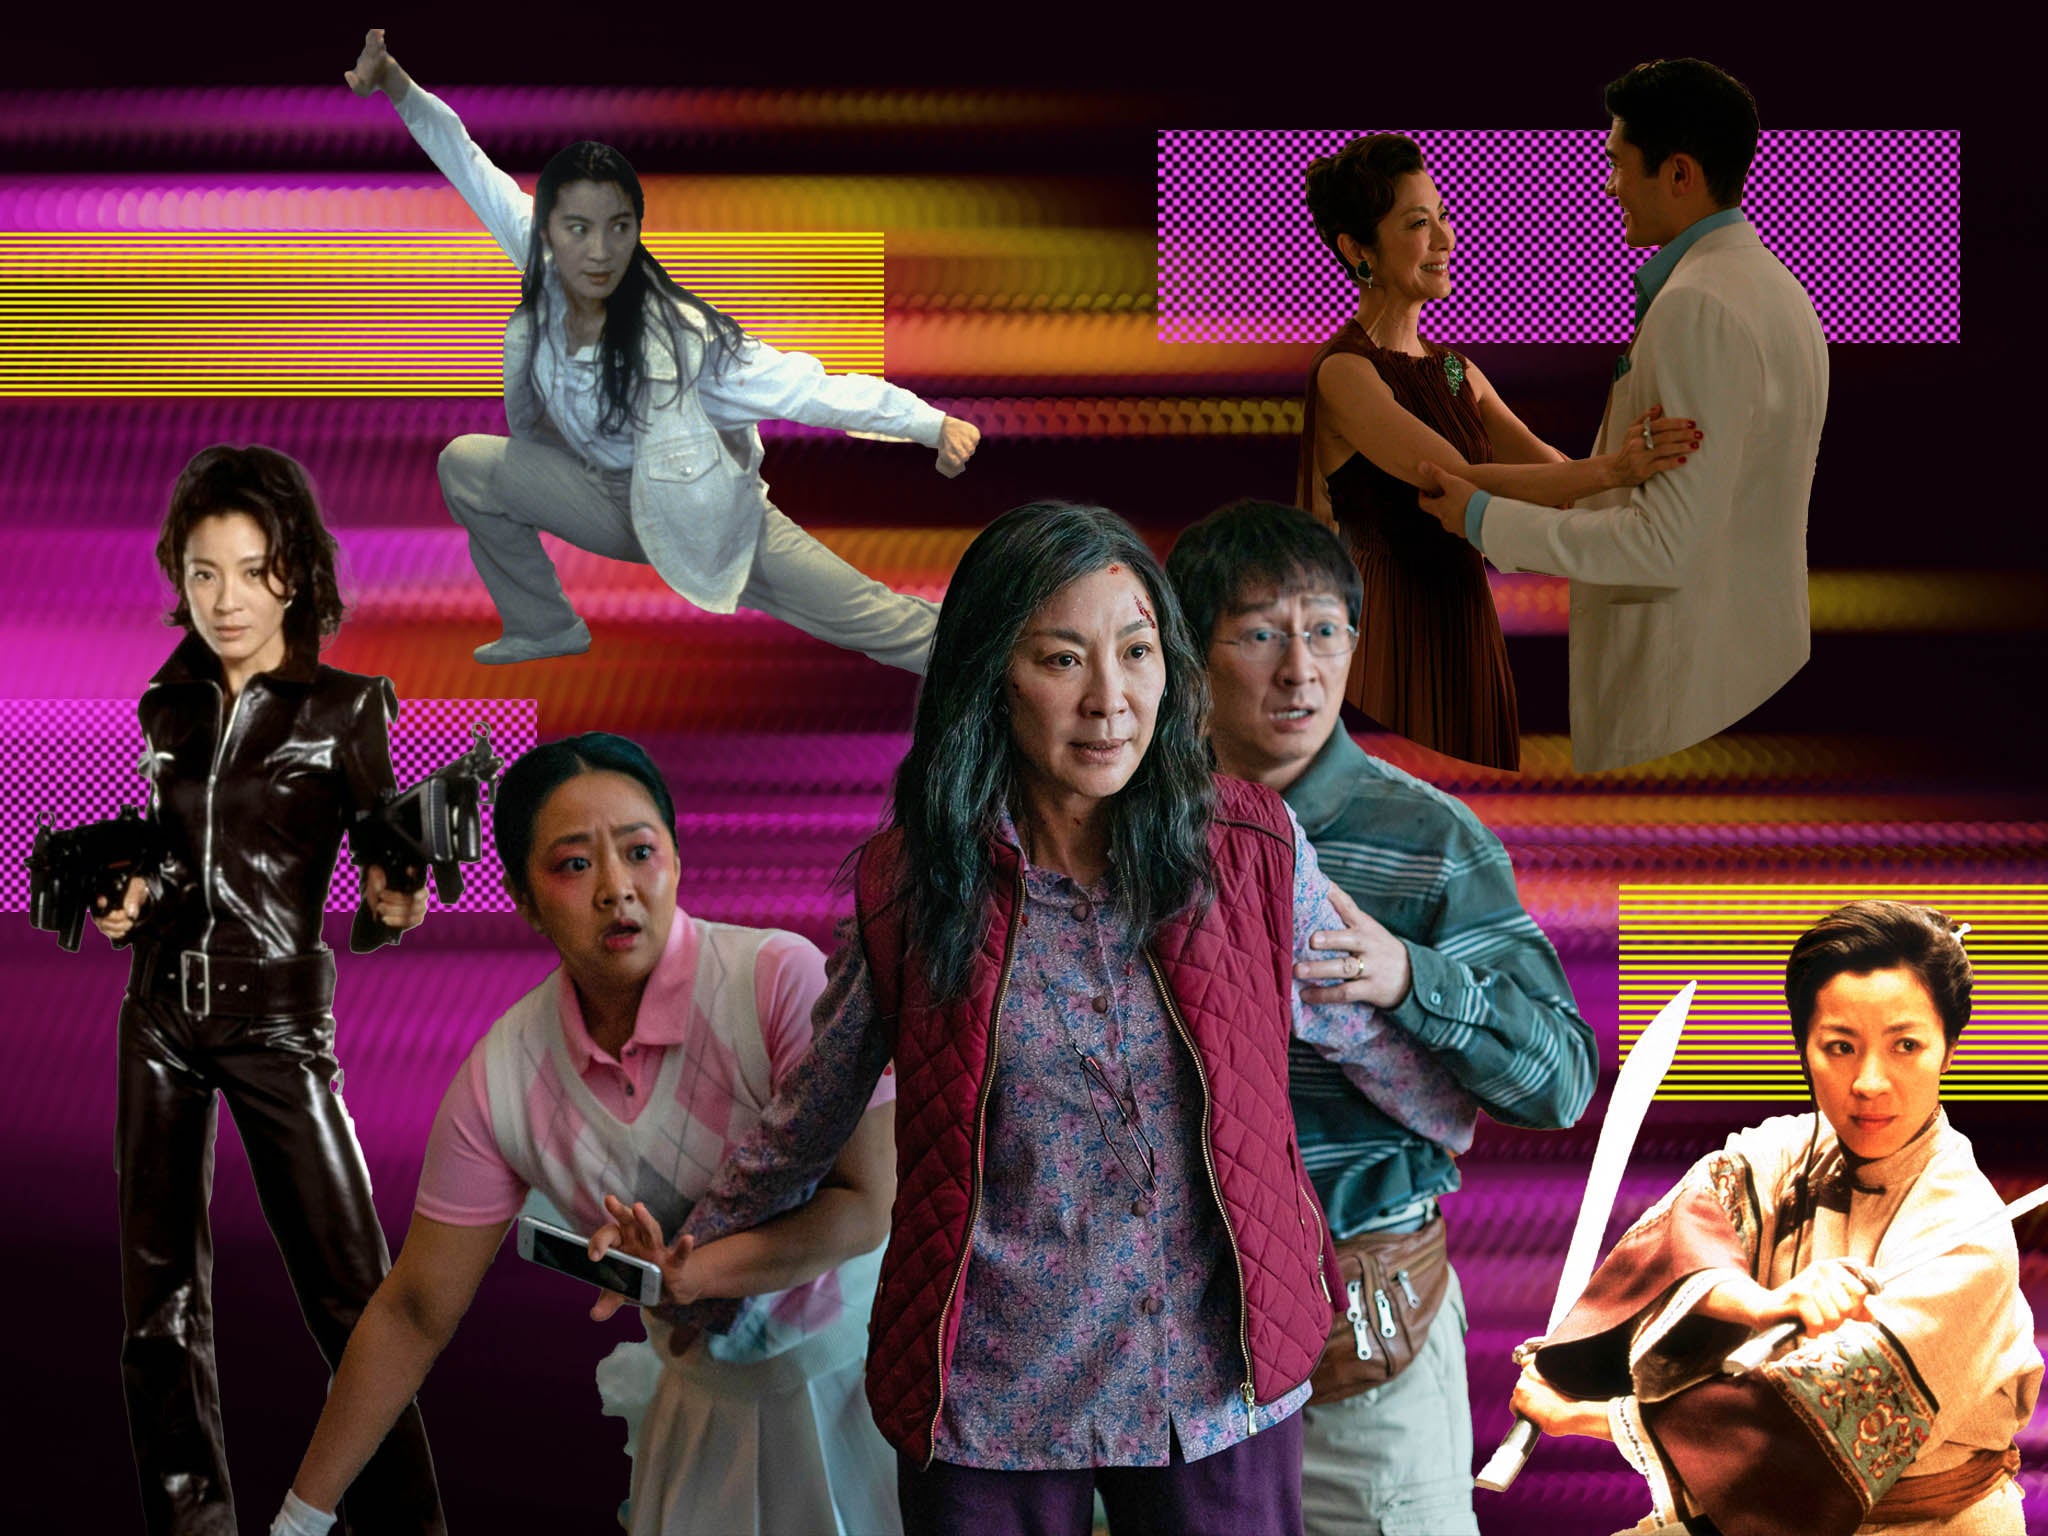 Michelle Yeoh is up for her first Oscar this weekend